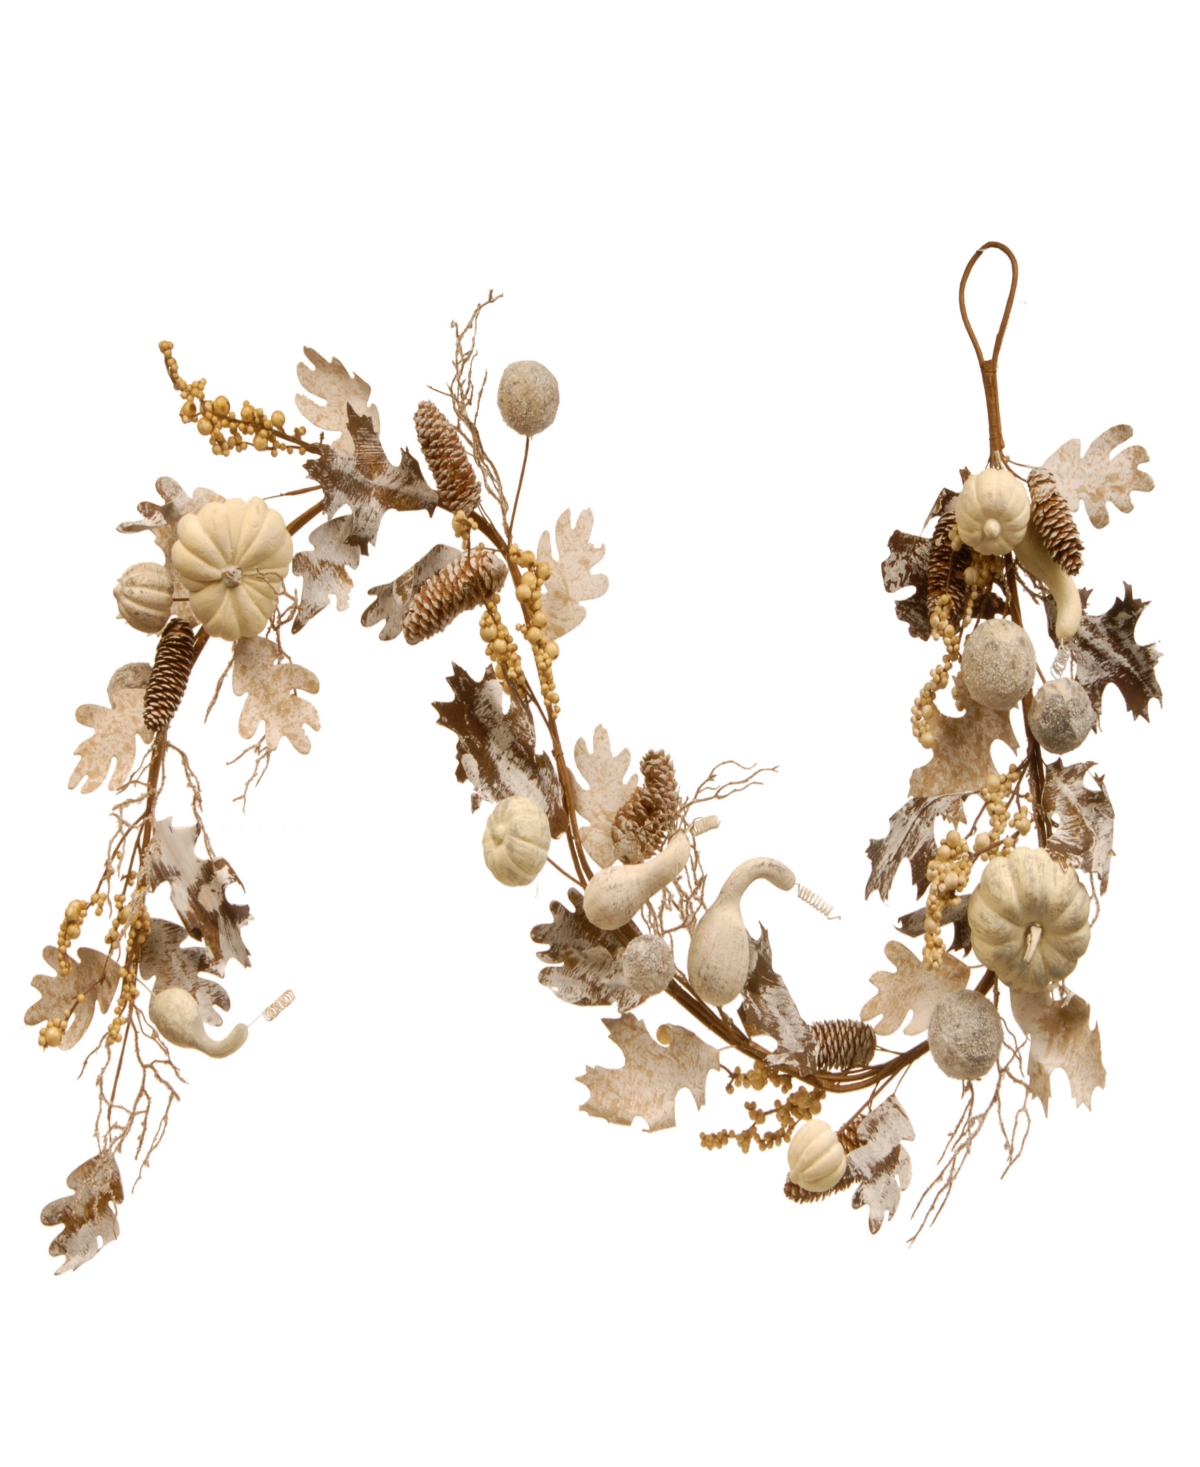 6' Artificial Autumn Garland, White, Made with Pumpkins, Gourds, Maple Leaves, Pinecones, Berry Clusters, Autumn Collection - Wh